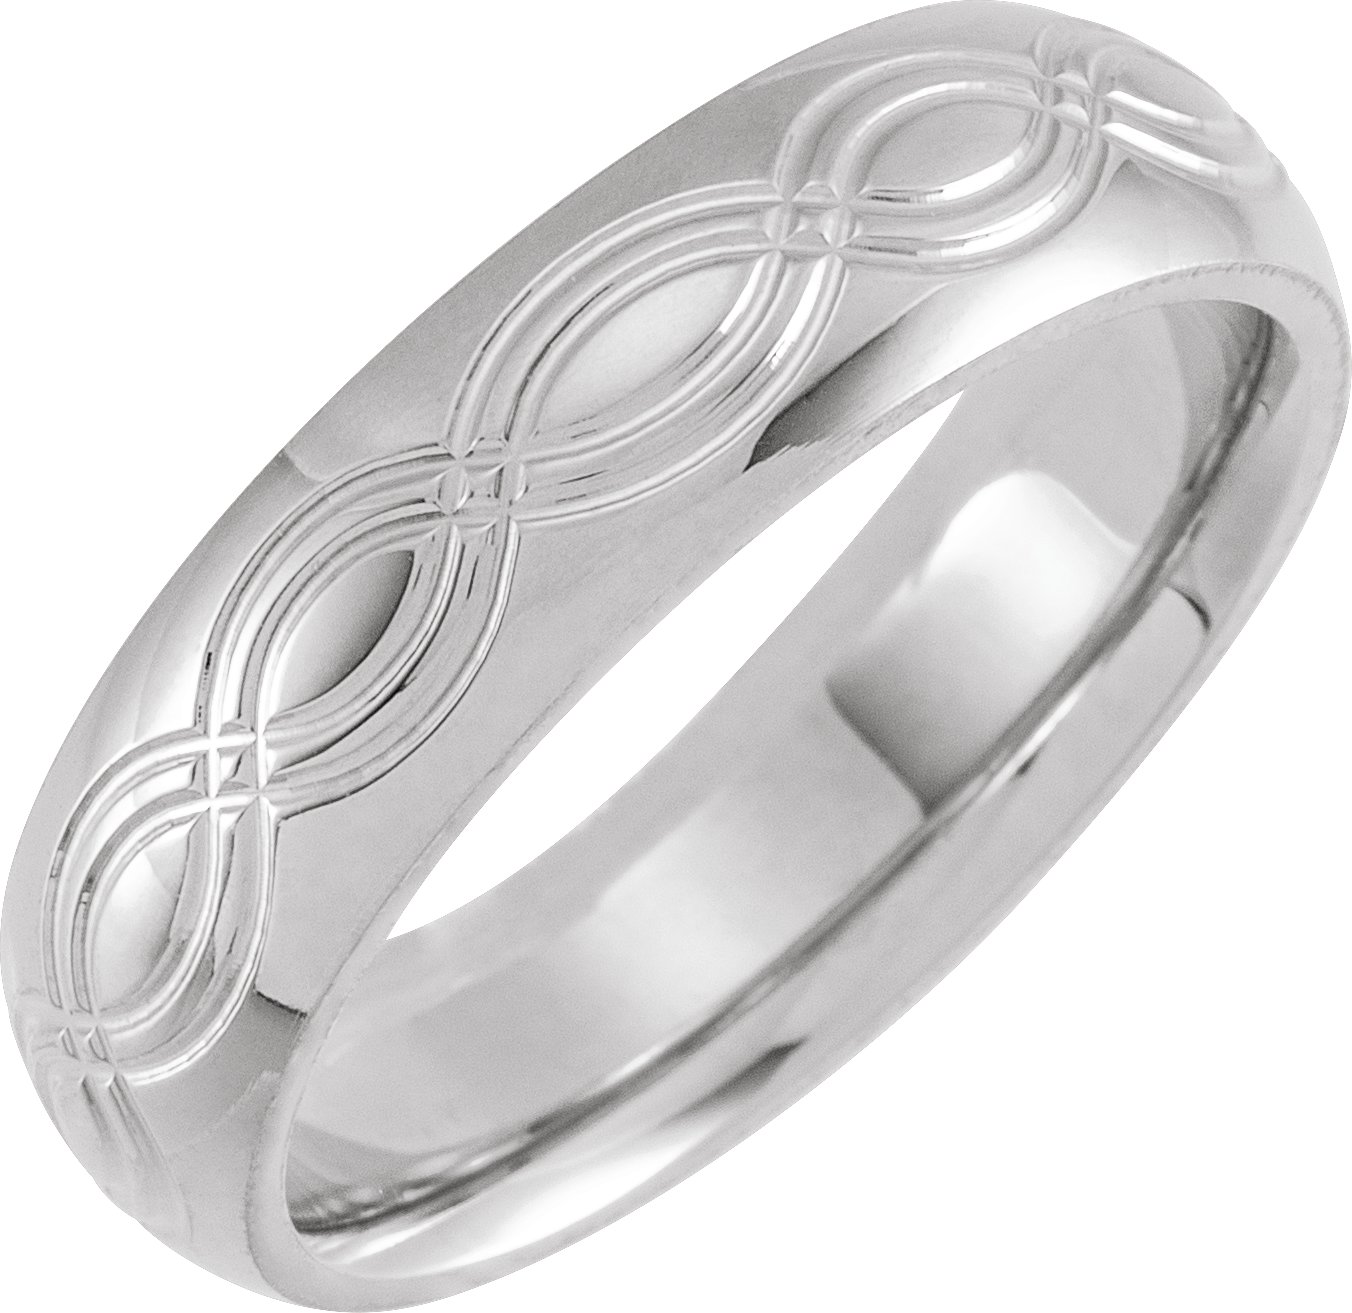 14K White 6 mm Infinity Patterned Band Size 9